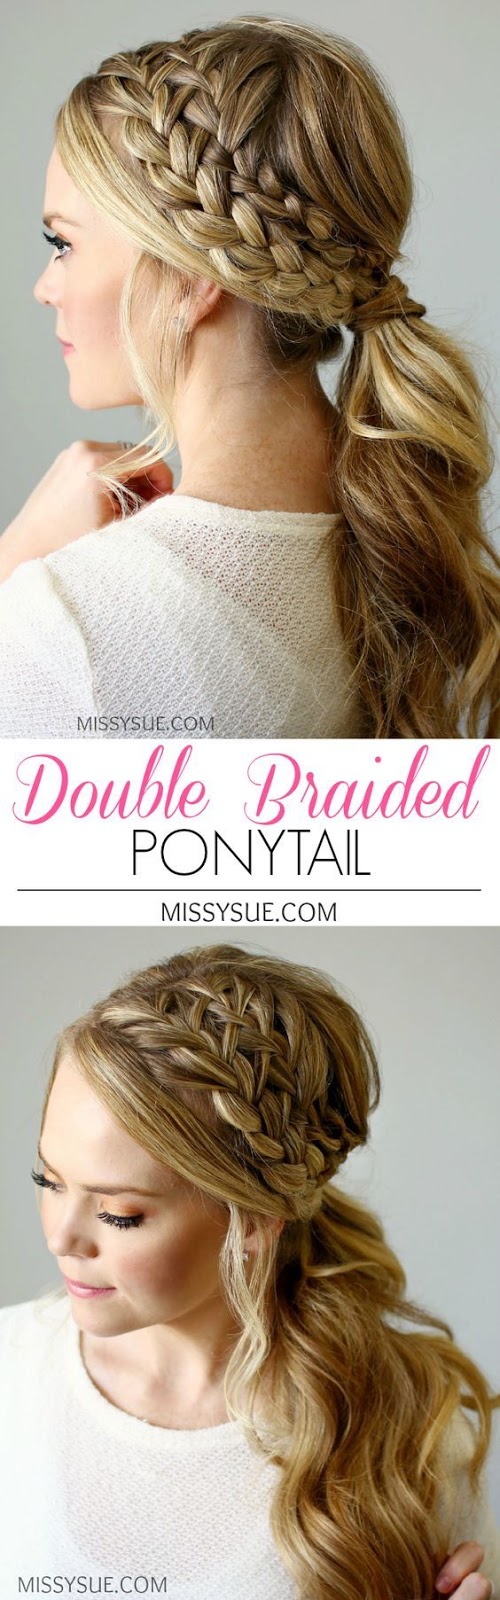 The Prettiest Braided Hairstyles For Long Hair With Tutorials